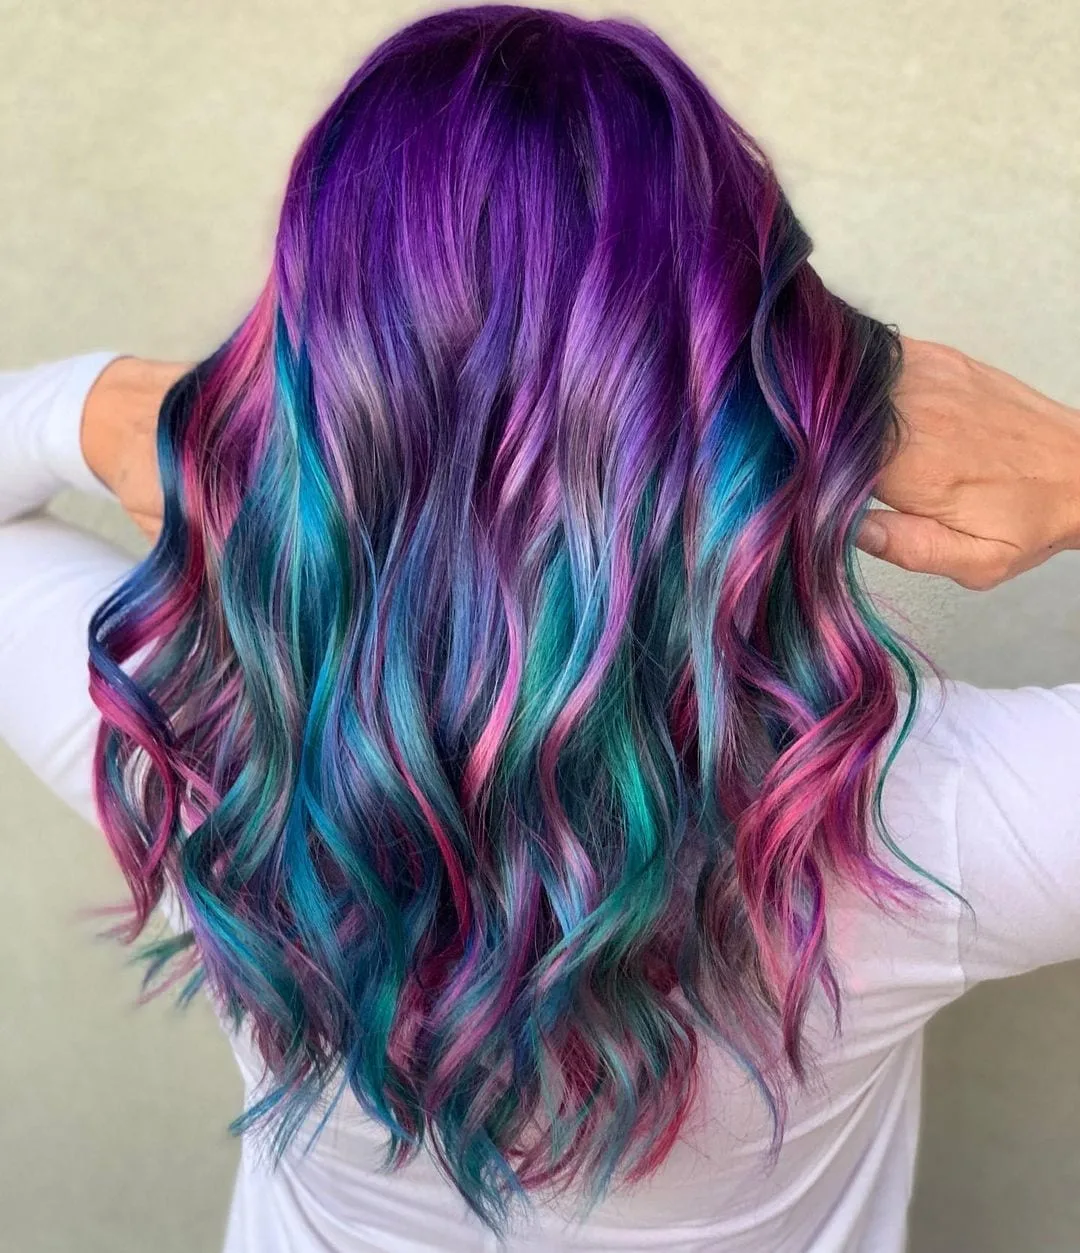 Woman with purple and pink galaxy hair holds it at the base